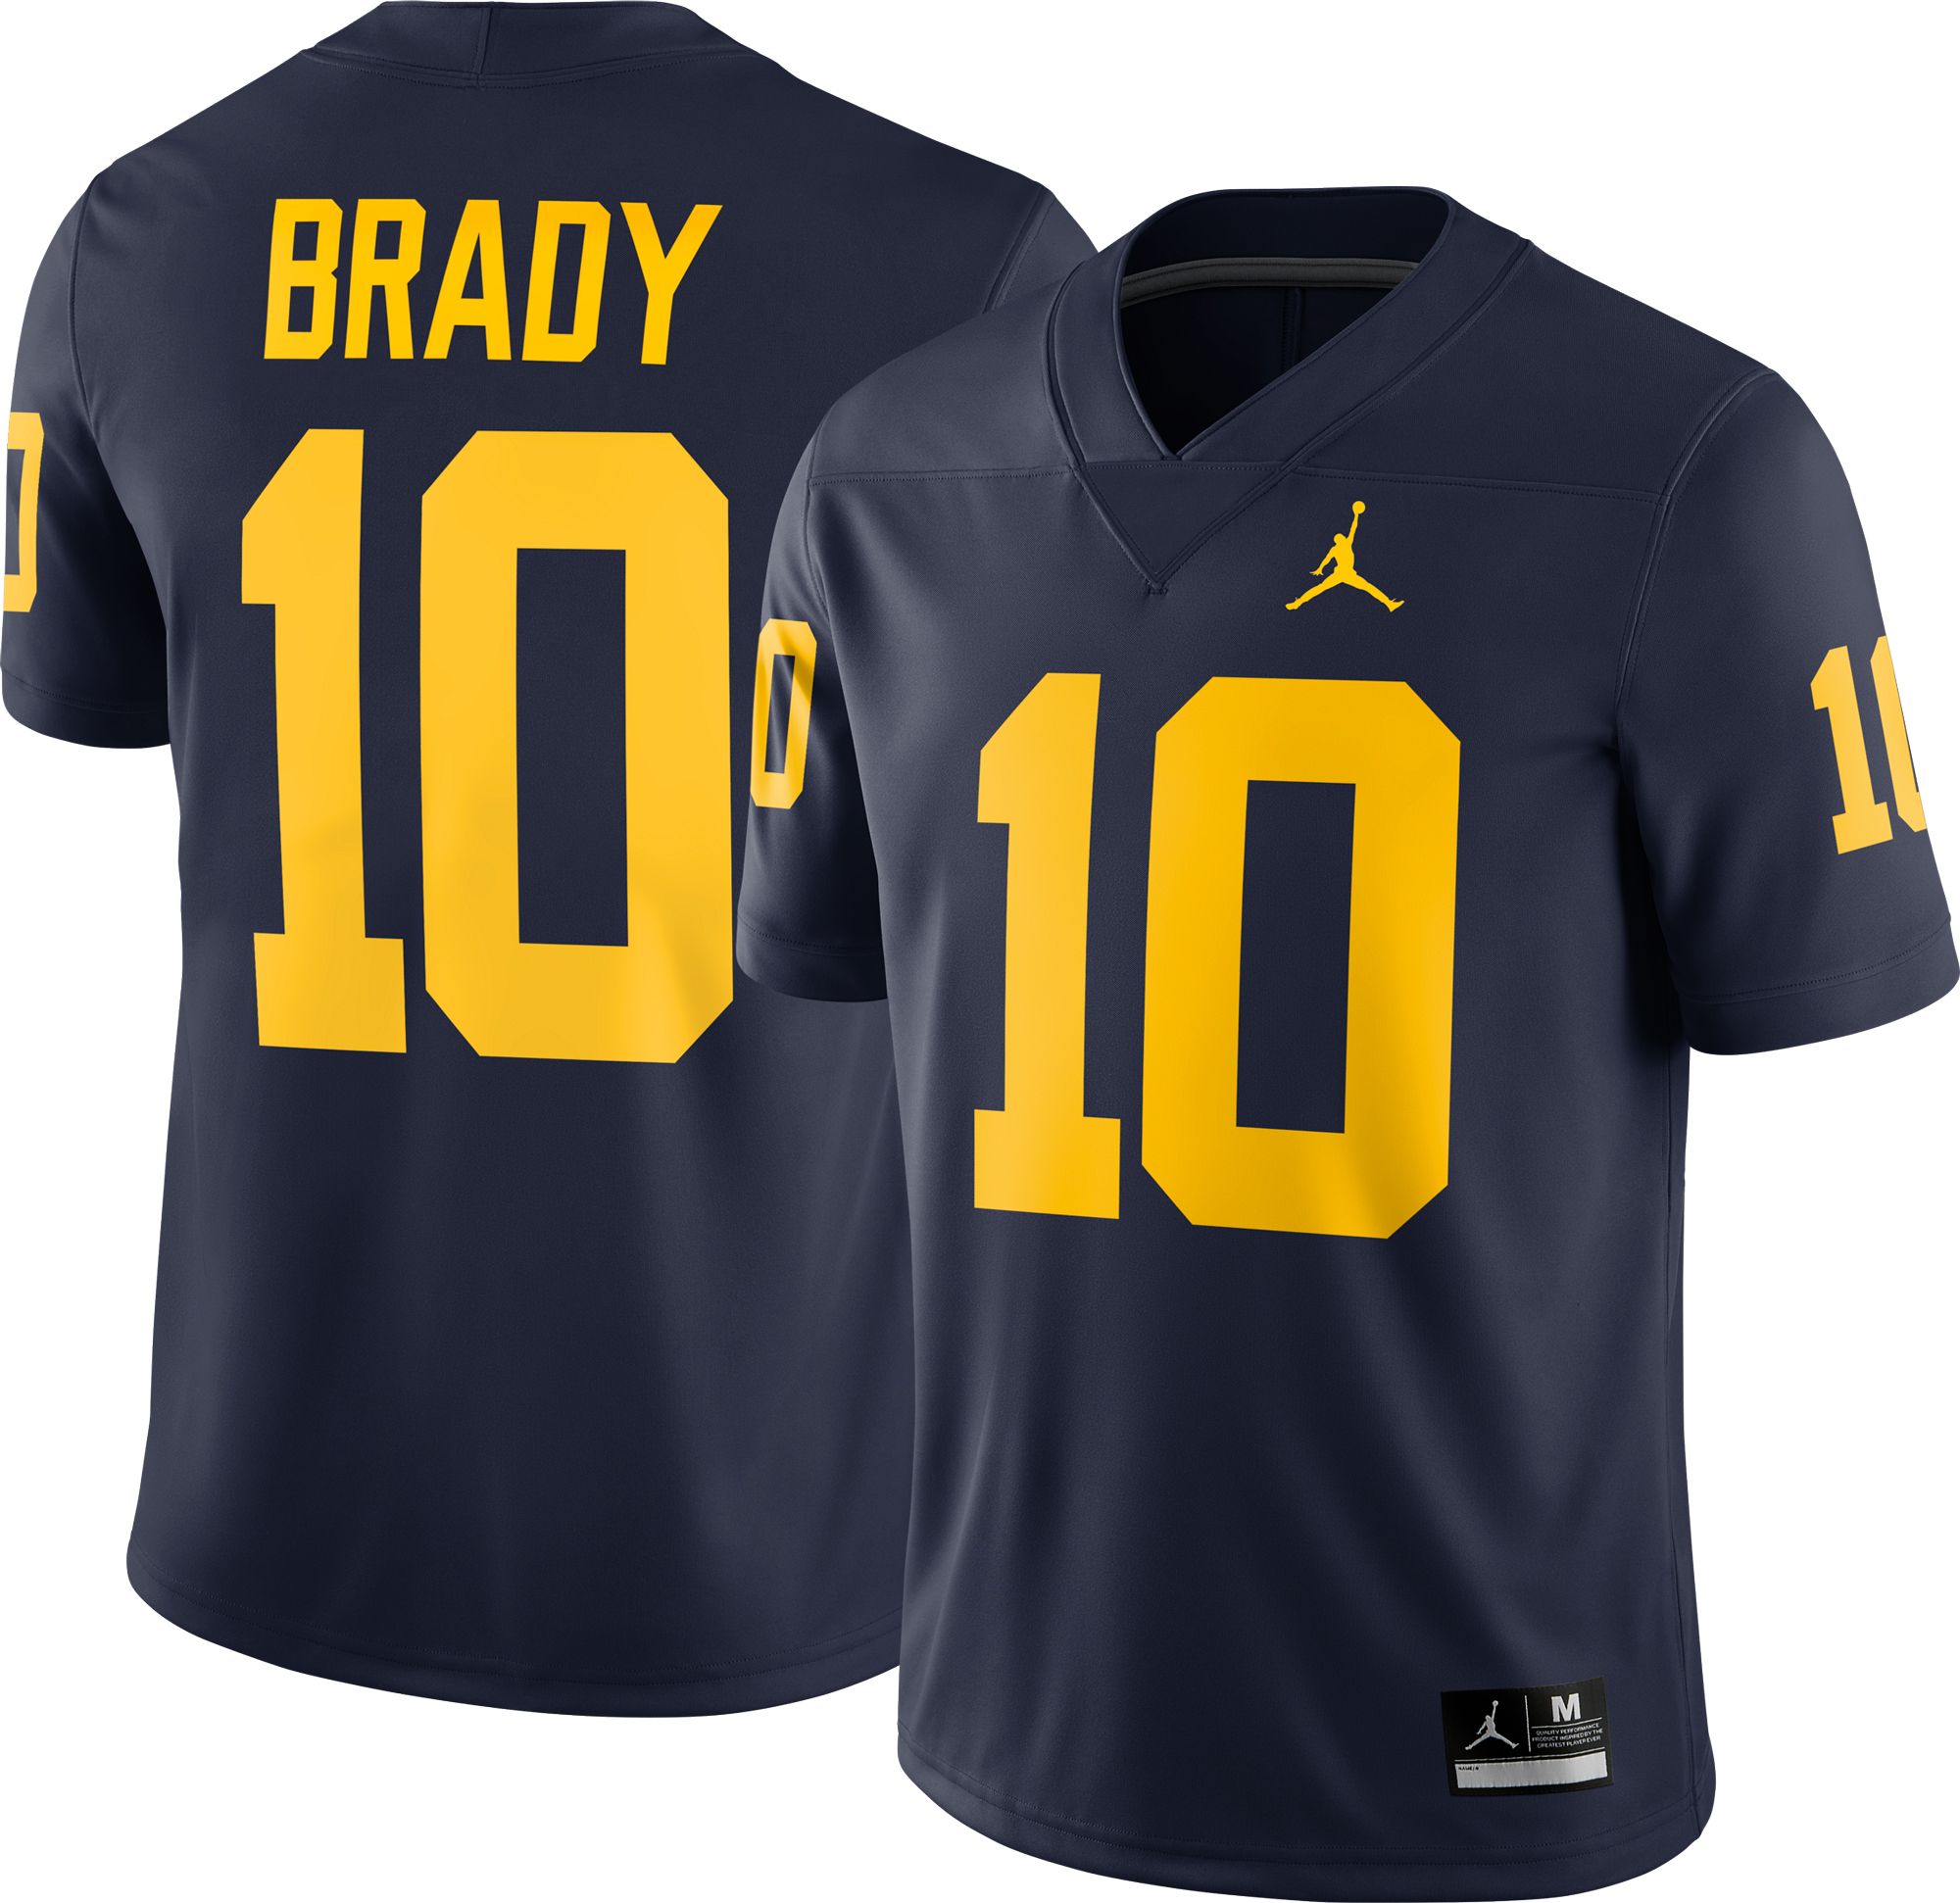 michigan wolverines soccer jersey